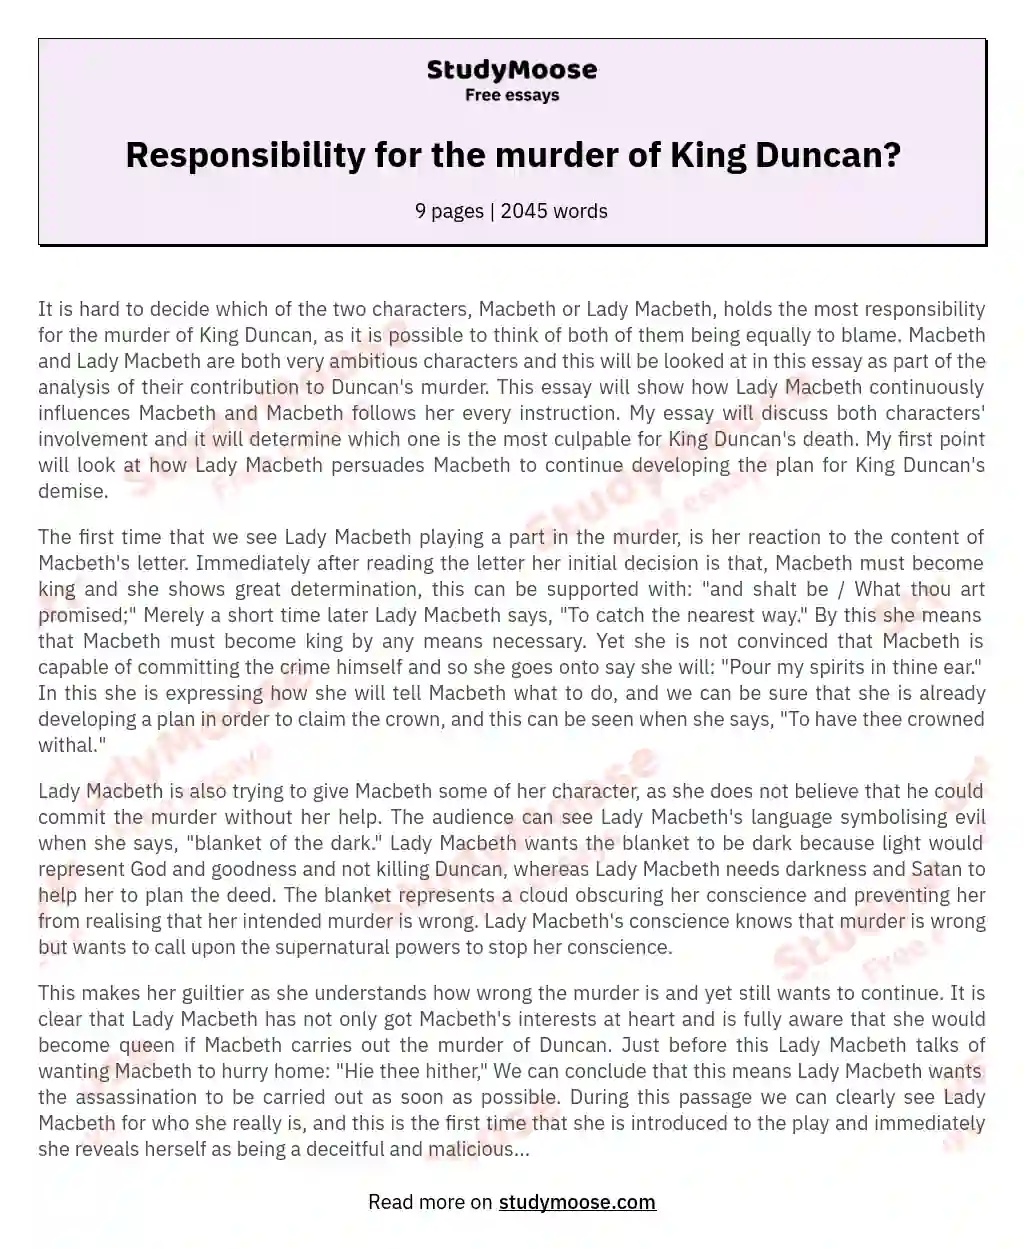 Responsibility for the murder of King Duncan?